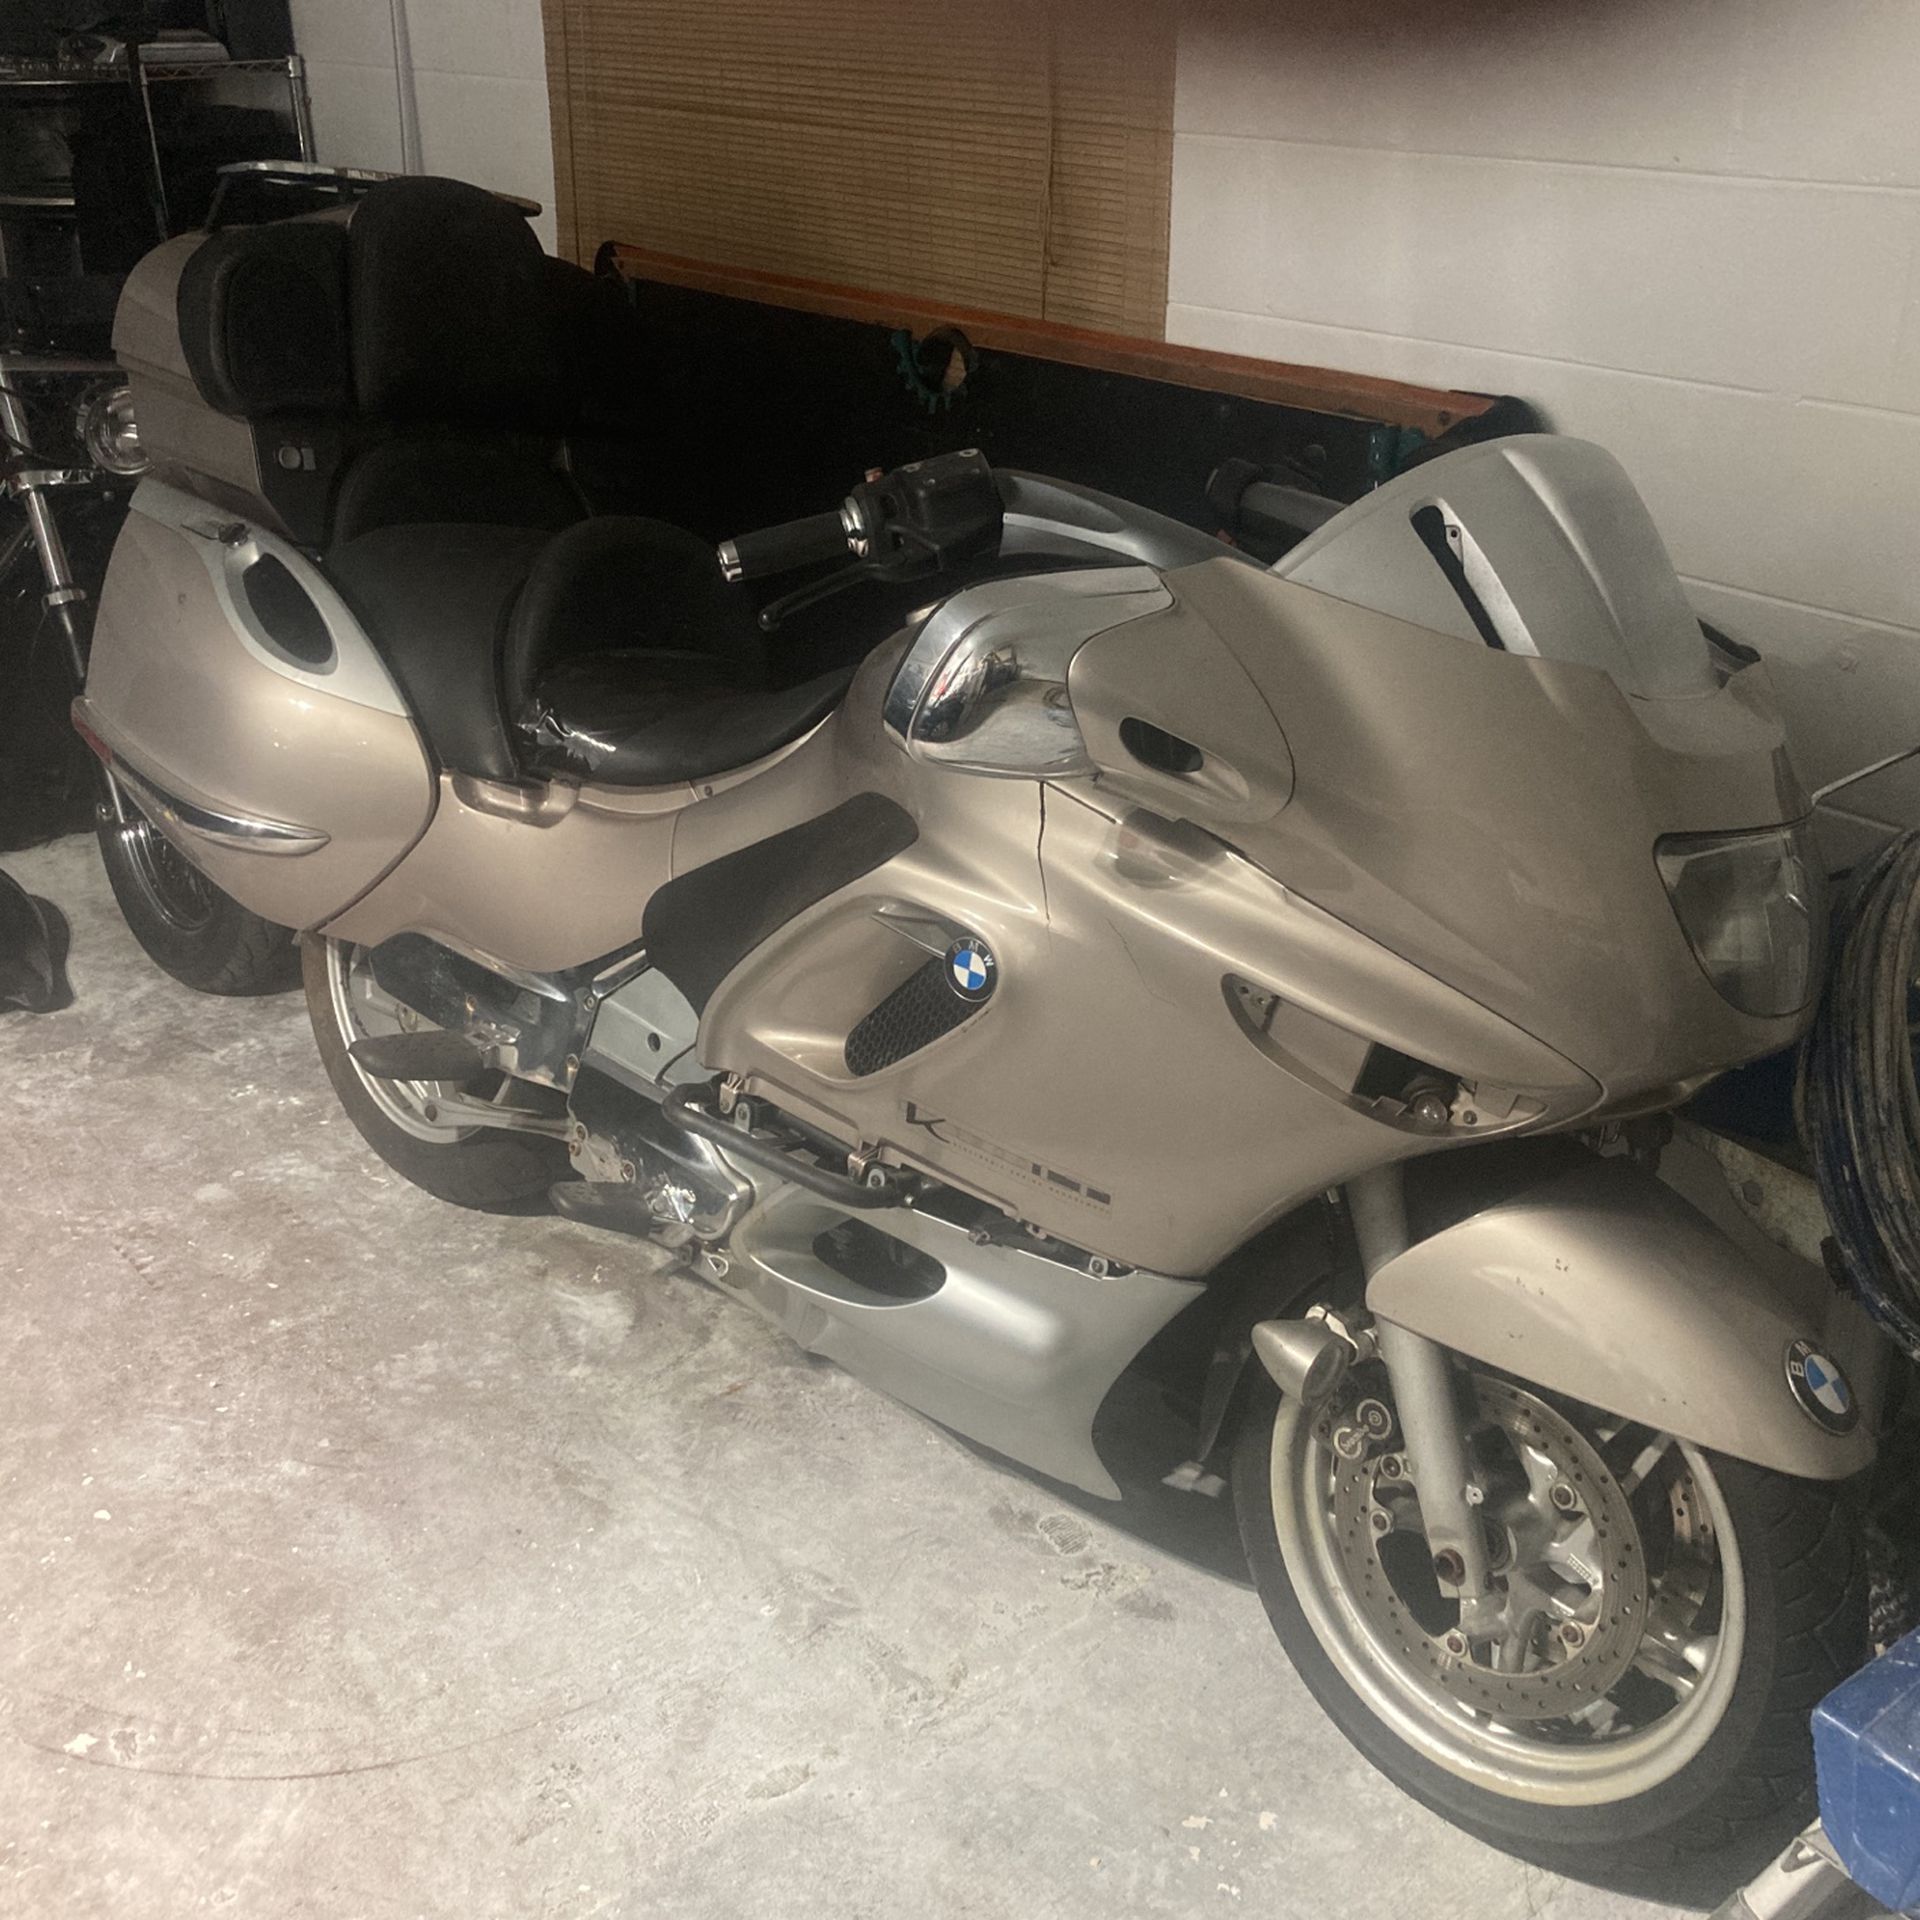 Rare Bmw K1200 Touring Motorcycle  Will Trade For Boat Camper Or Truck